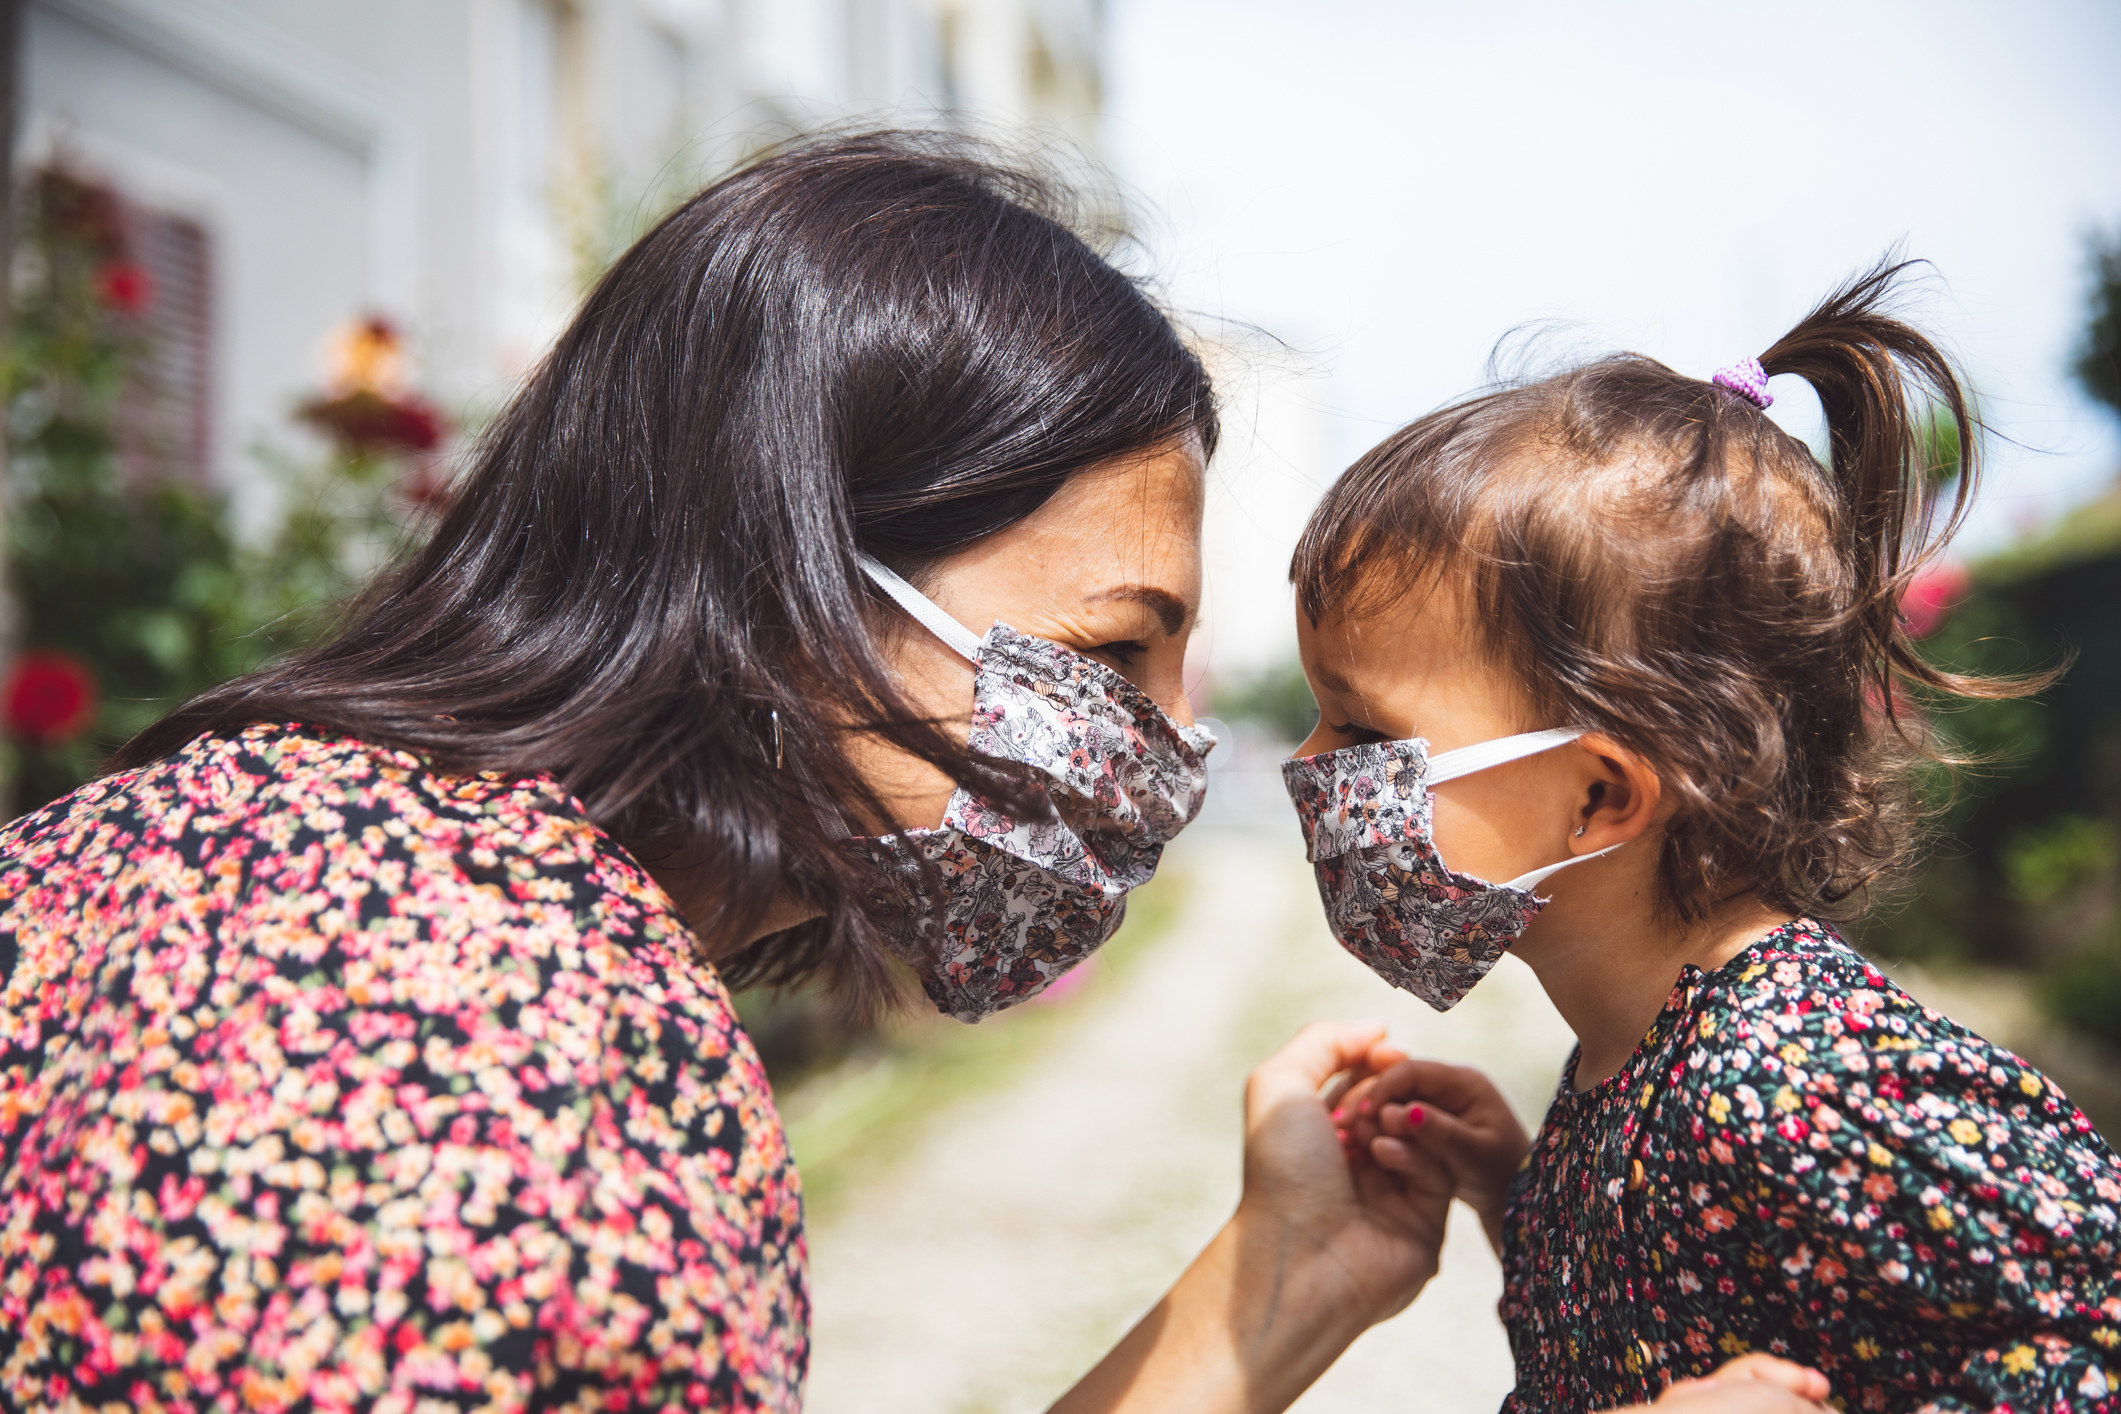 A woman and a toddler with their faces close together, wearing matching patterned masks.